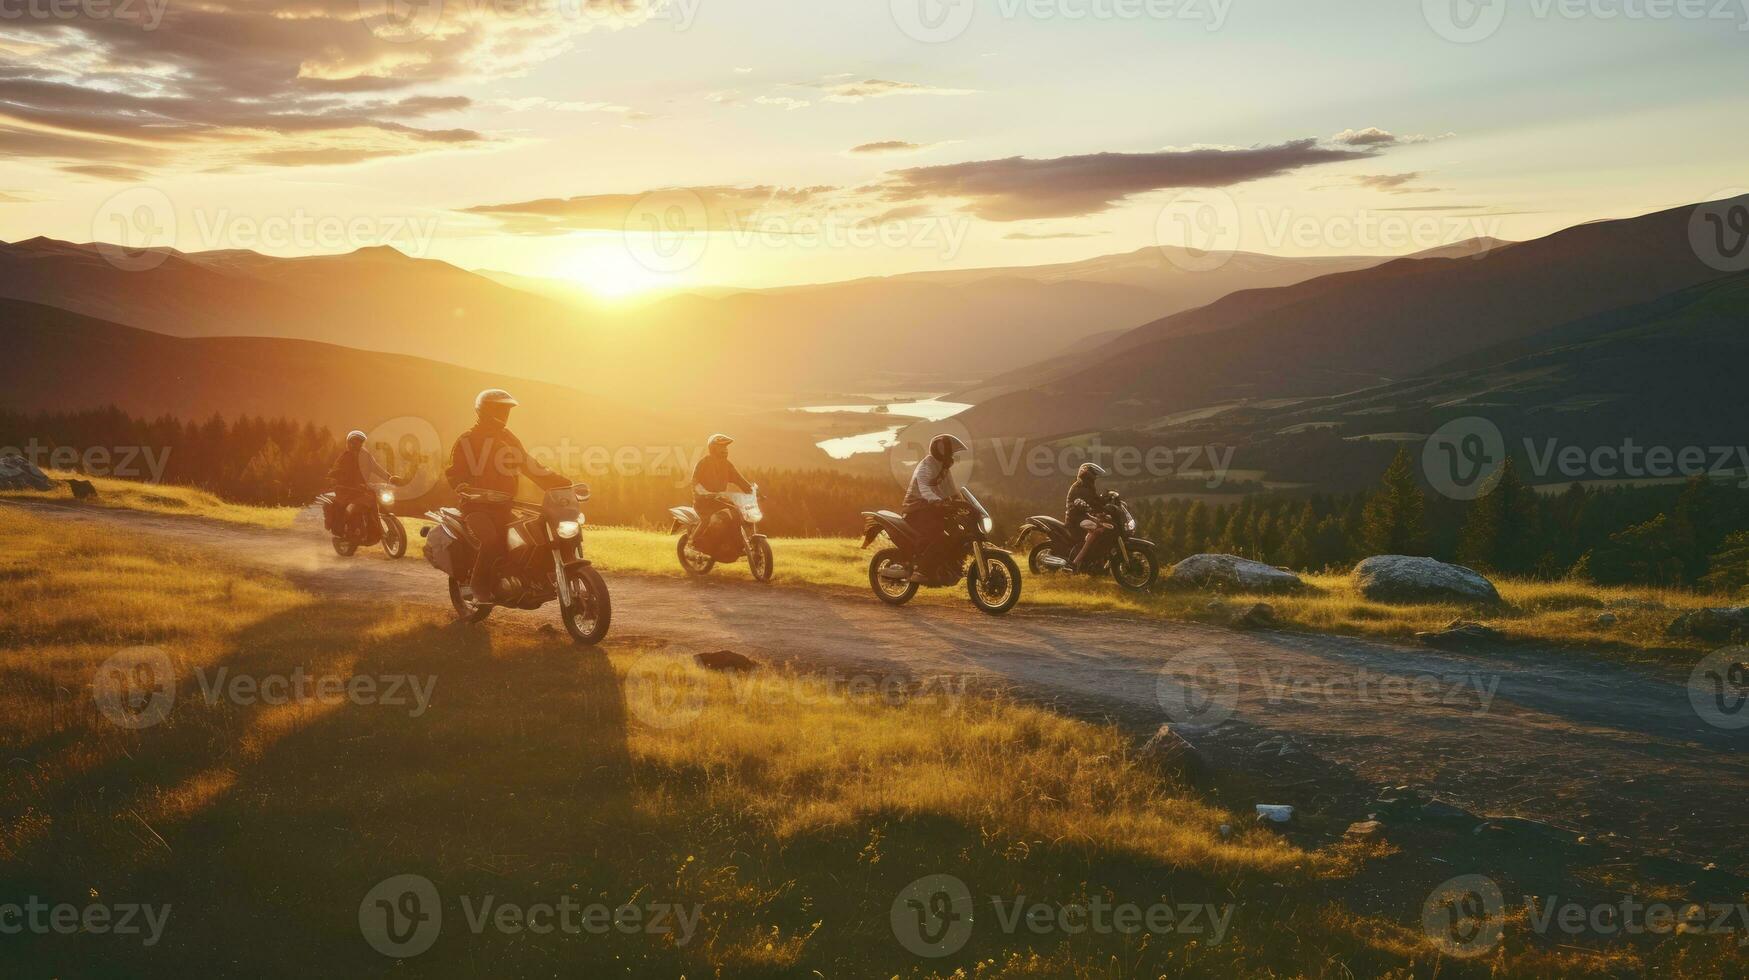 AI generated Evening's Epic Ride - Capturing the Picturesque Drama of a Group of Bikers Against the Dusky Glow photo